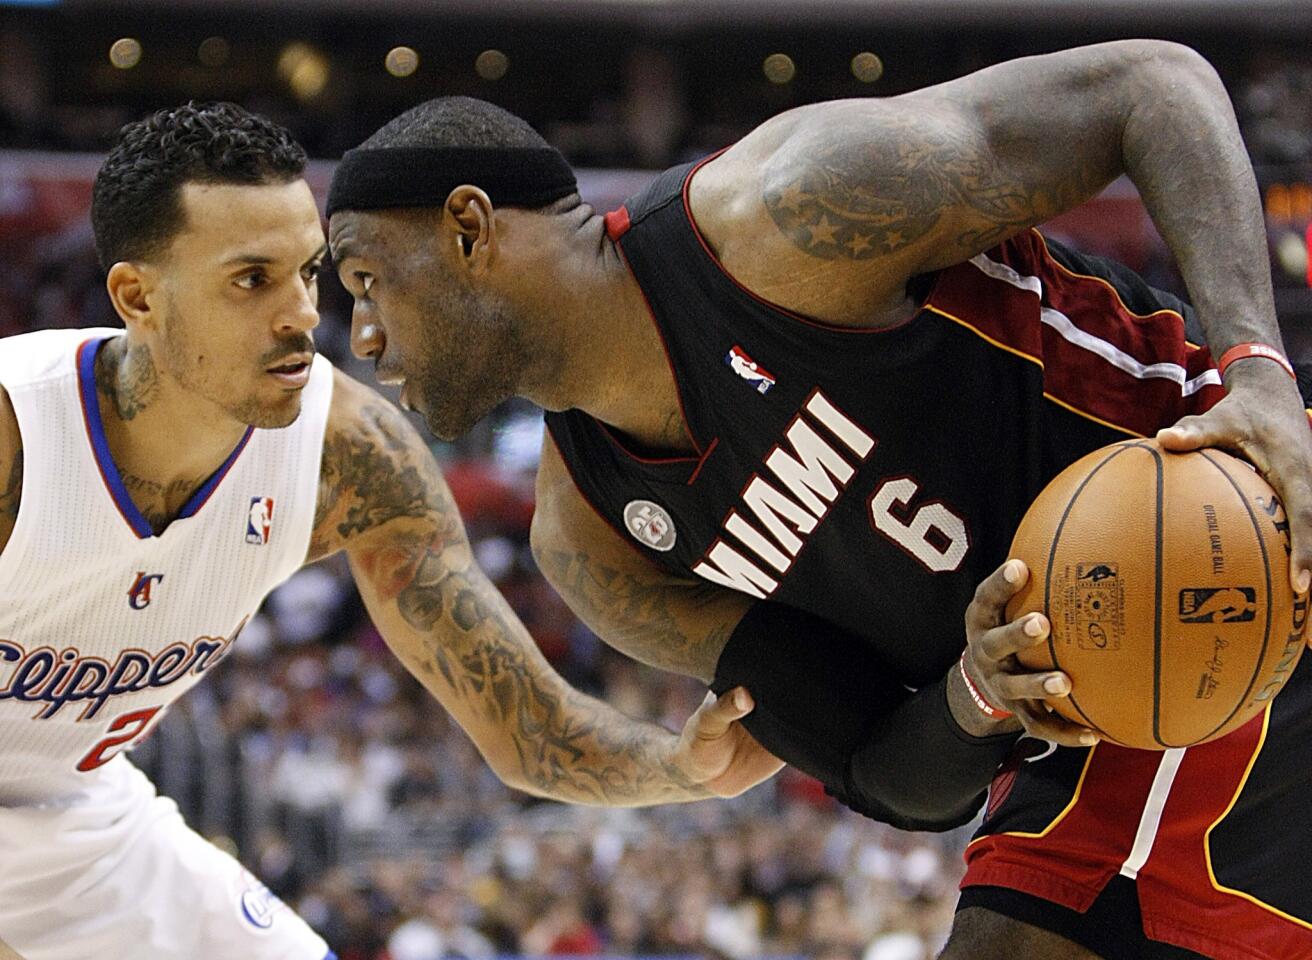 Clippers forward Matt Barnes plays tight defense on Heat forward LeBron James during their game Wednesday night at Staples Center.